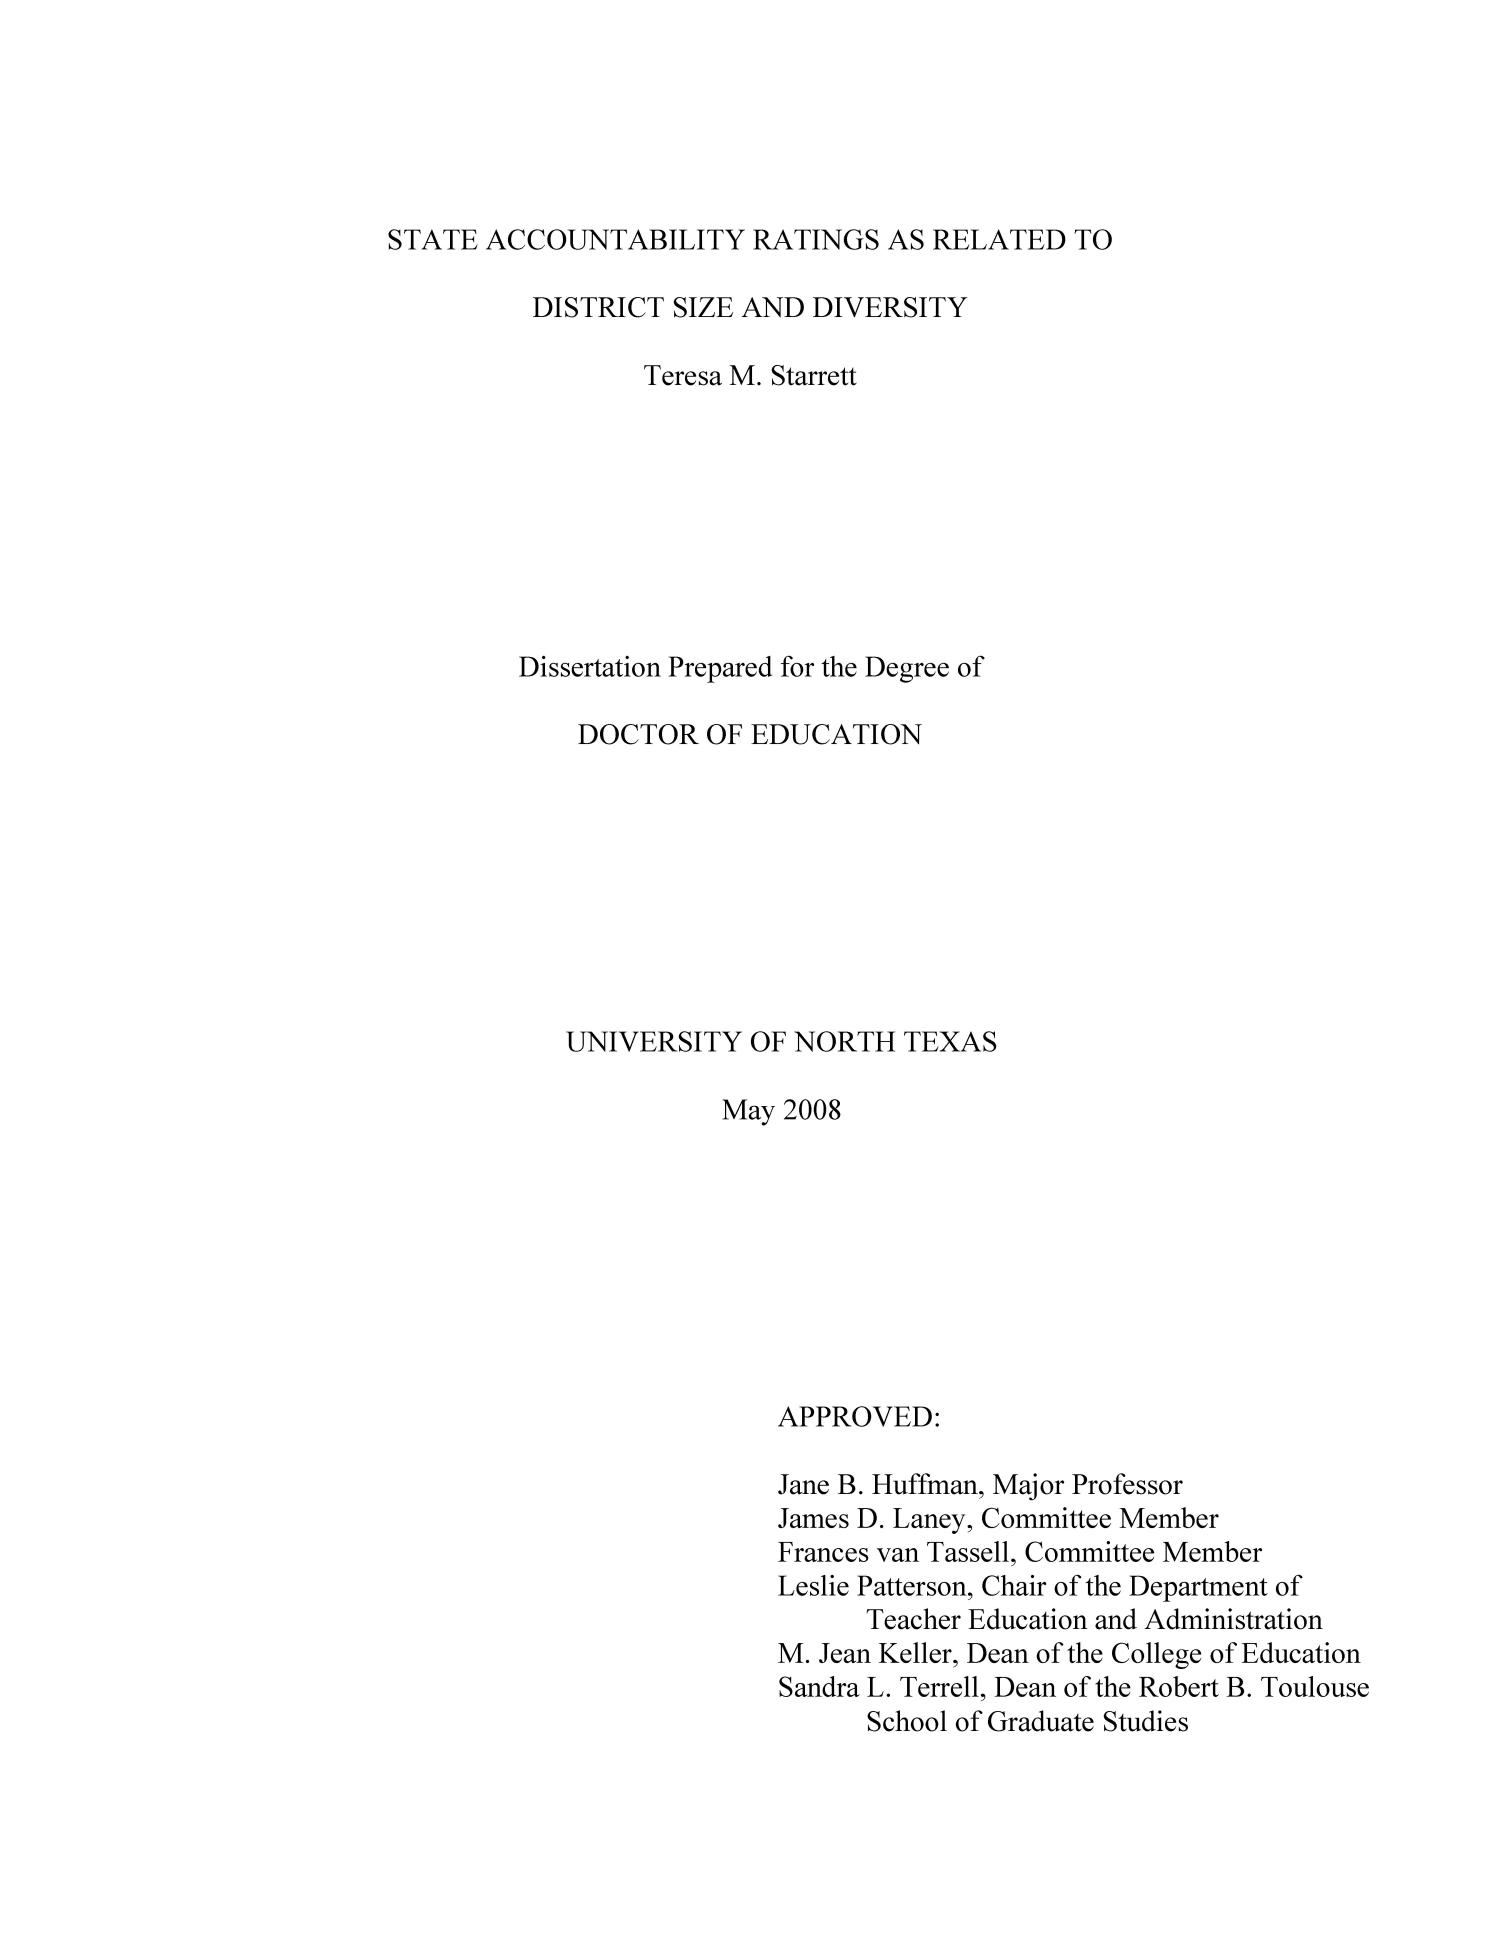 State accountability ratings as related to district size and diversity.
                                                
                                                    Title Page
                                                